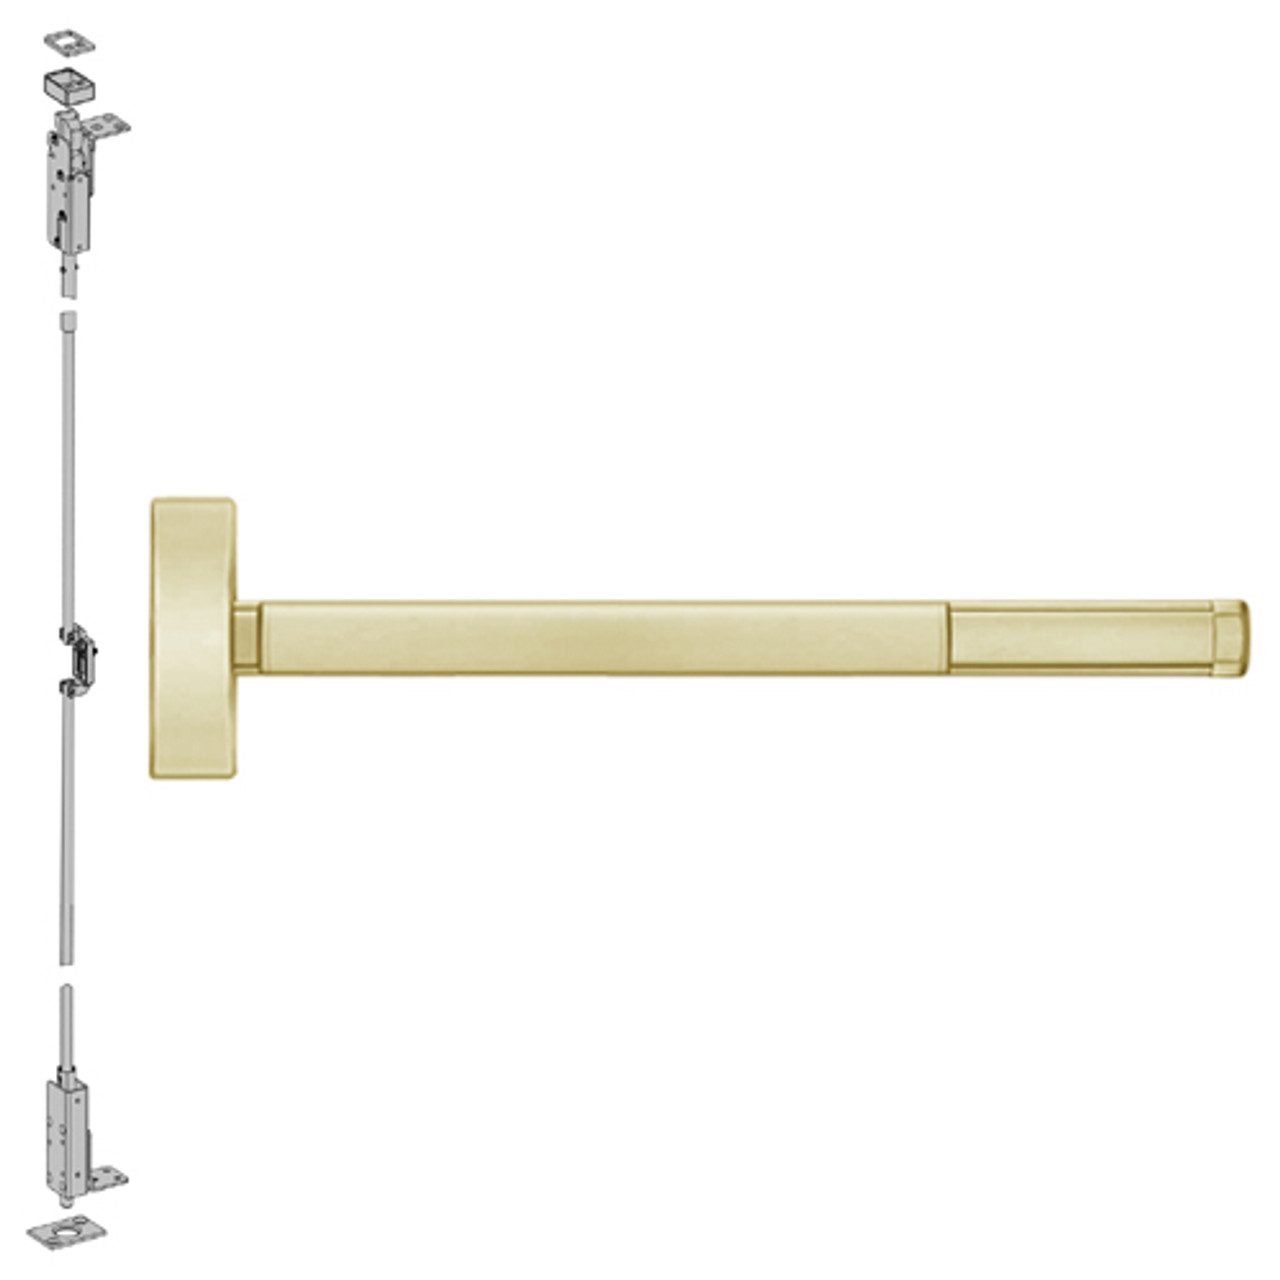 DE2705LBR-606-36 PHI 2700 Series Non Fire Rated Wood Door Concealed Vertical Exit Device Prepped for Key Controls Thumb Piece in Satin Brass Finish